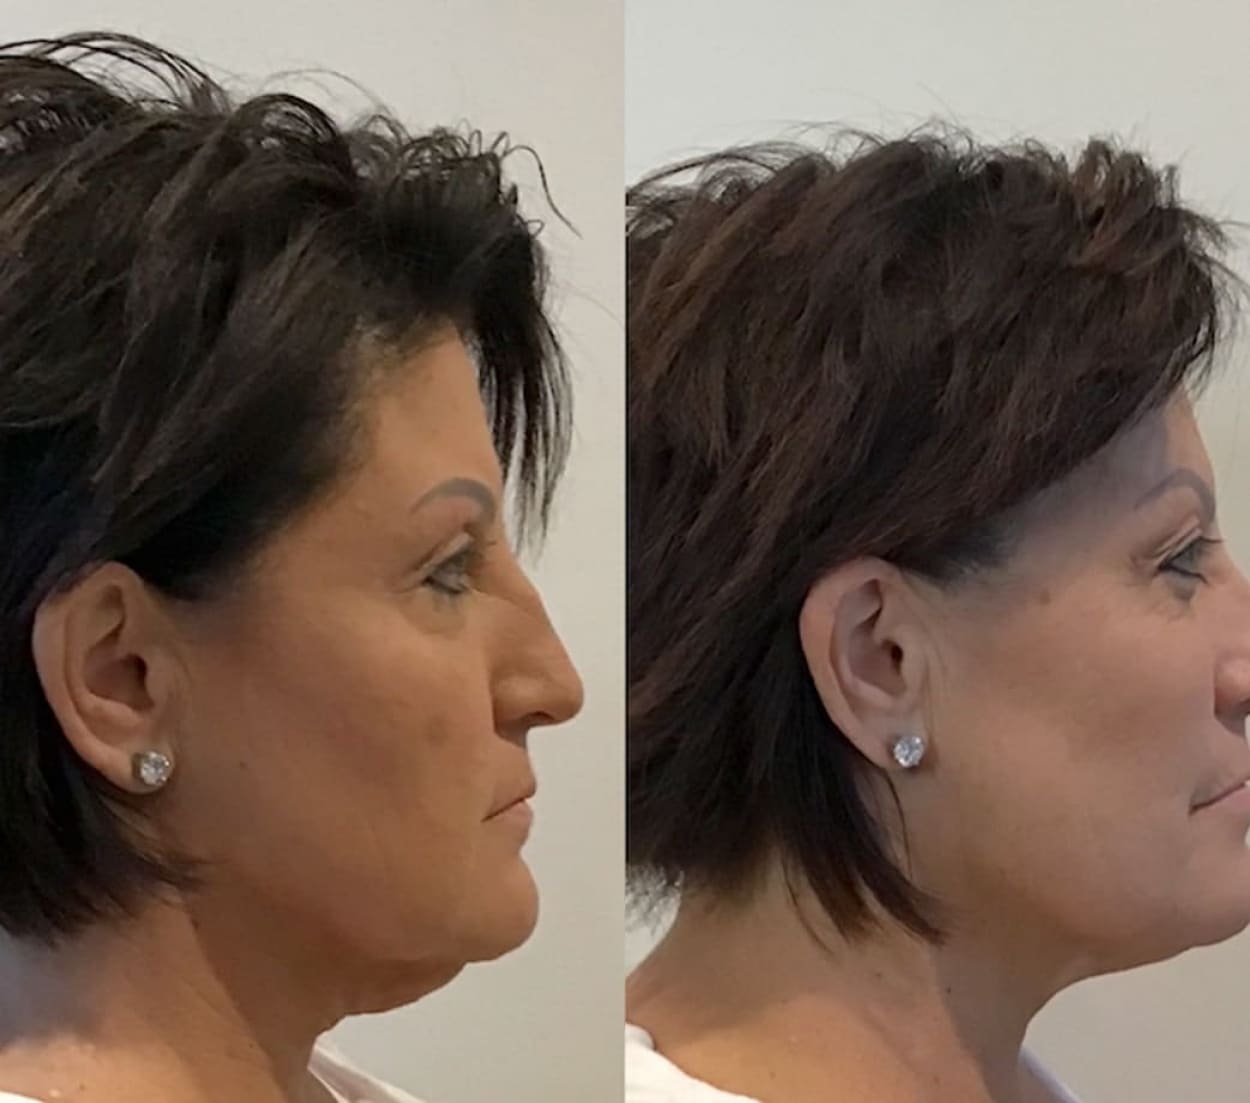 Threadlifts are cutting edge cosmetic surgery procedures that can give you similar results as a facelift without the invasive surgery.